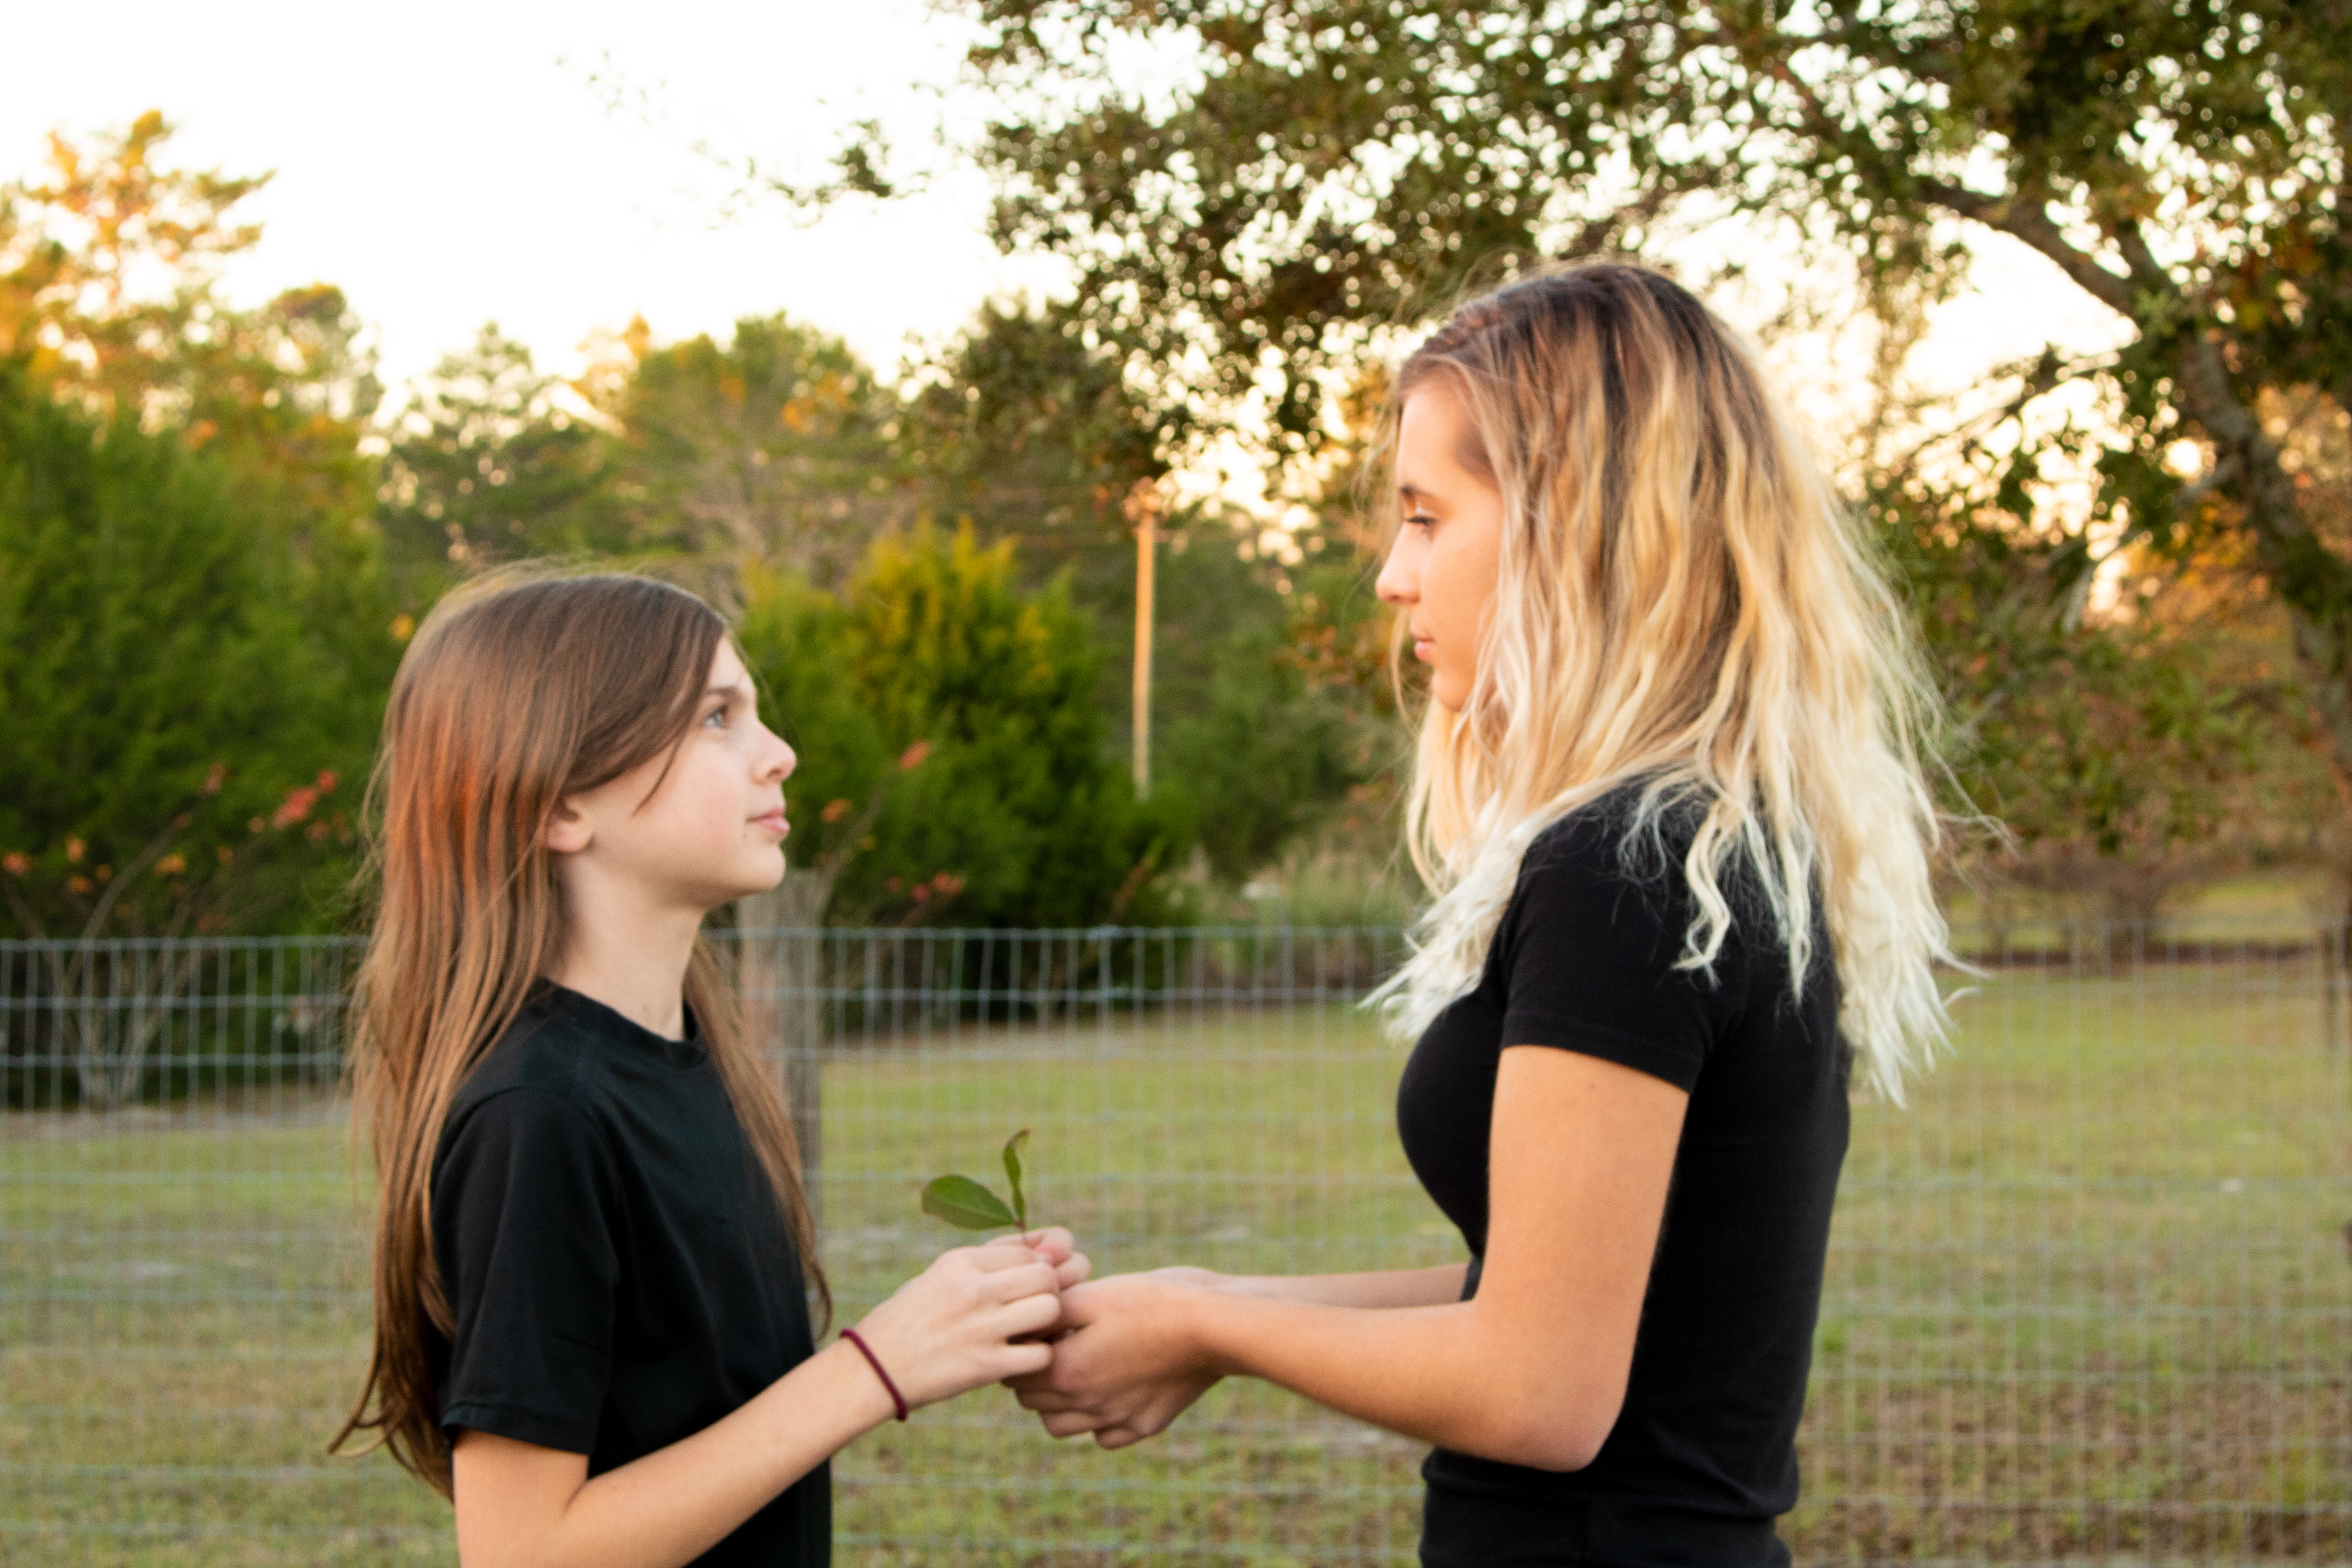 Young girl and teenager holding young plant between them